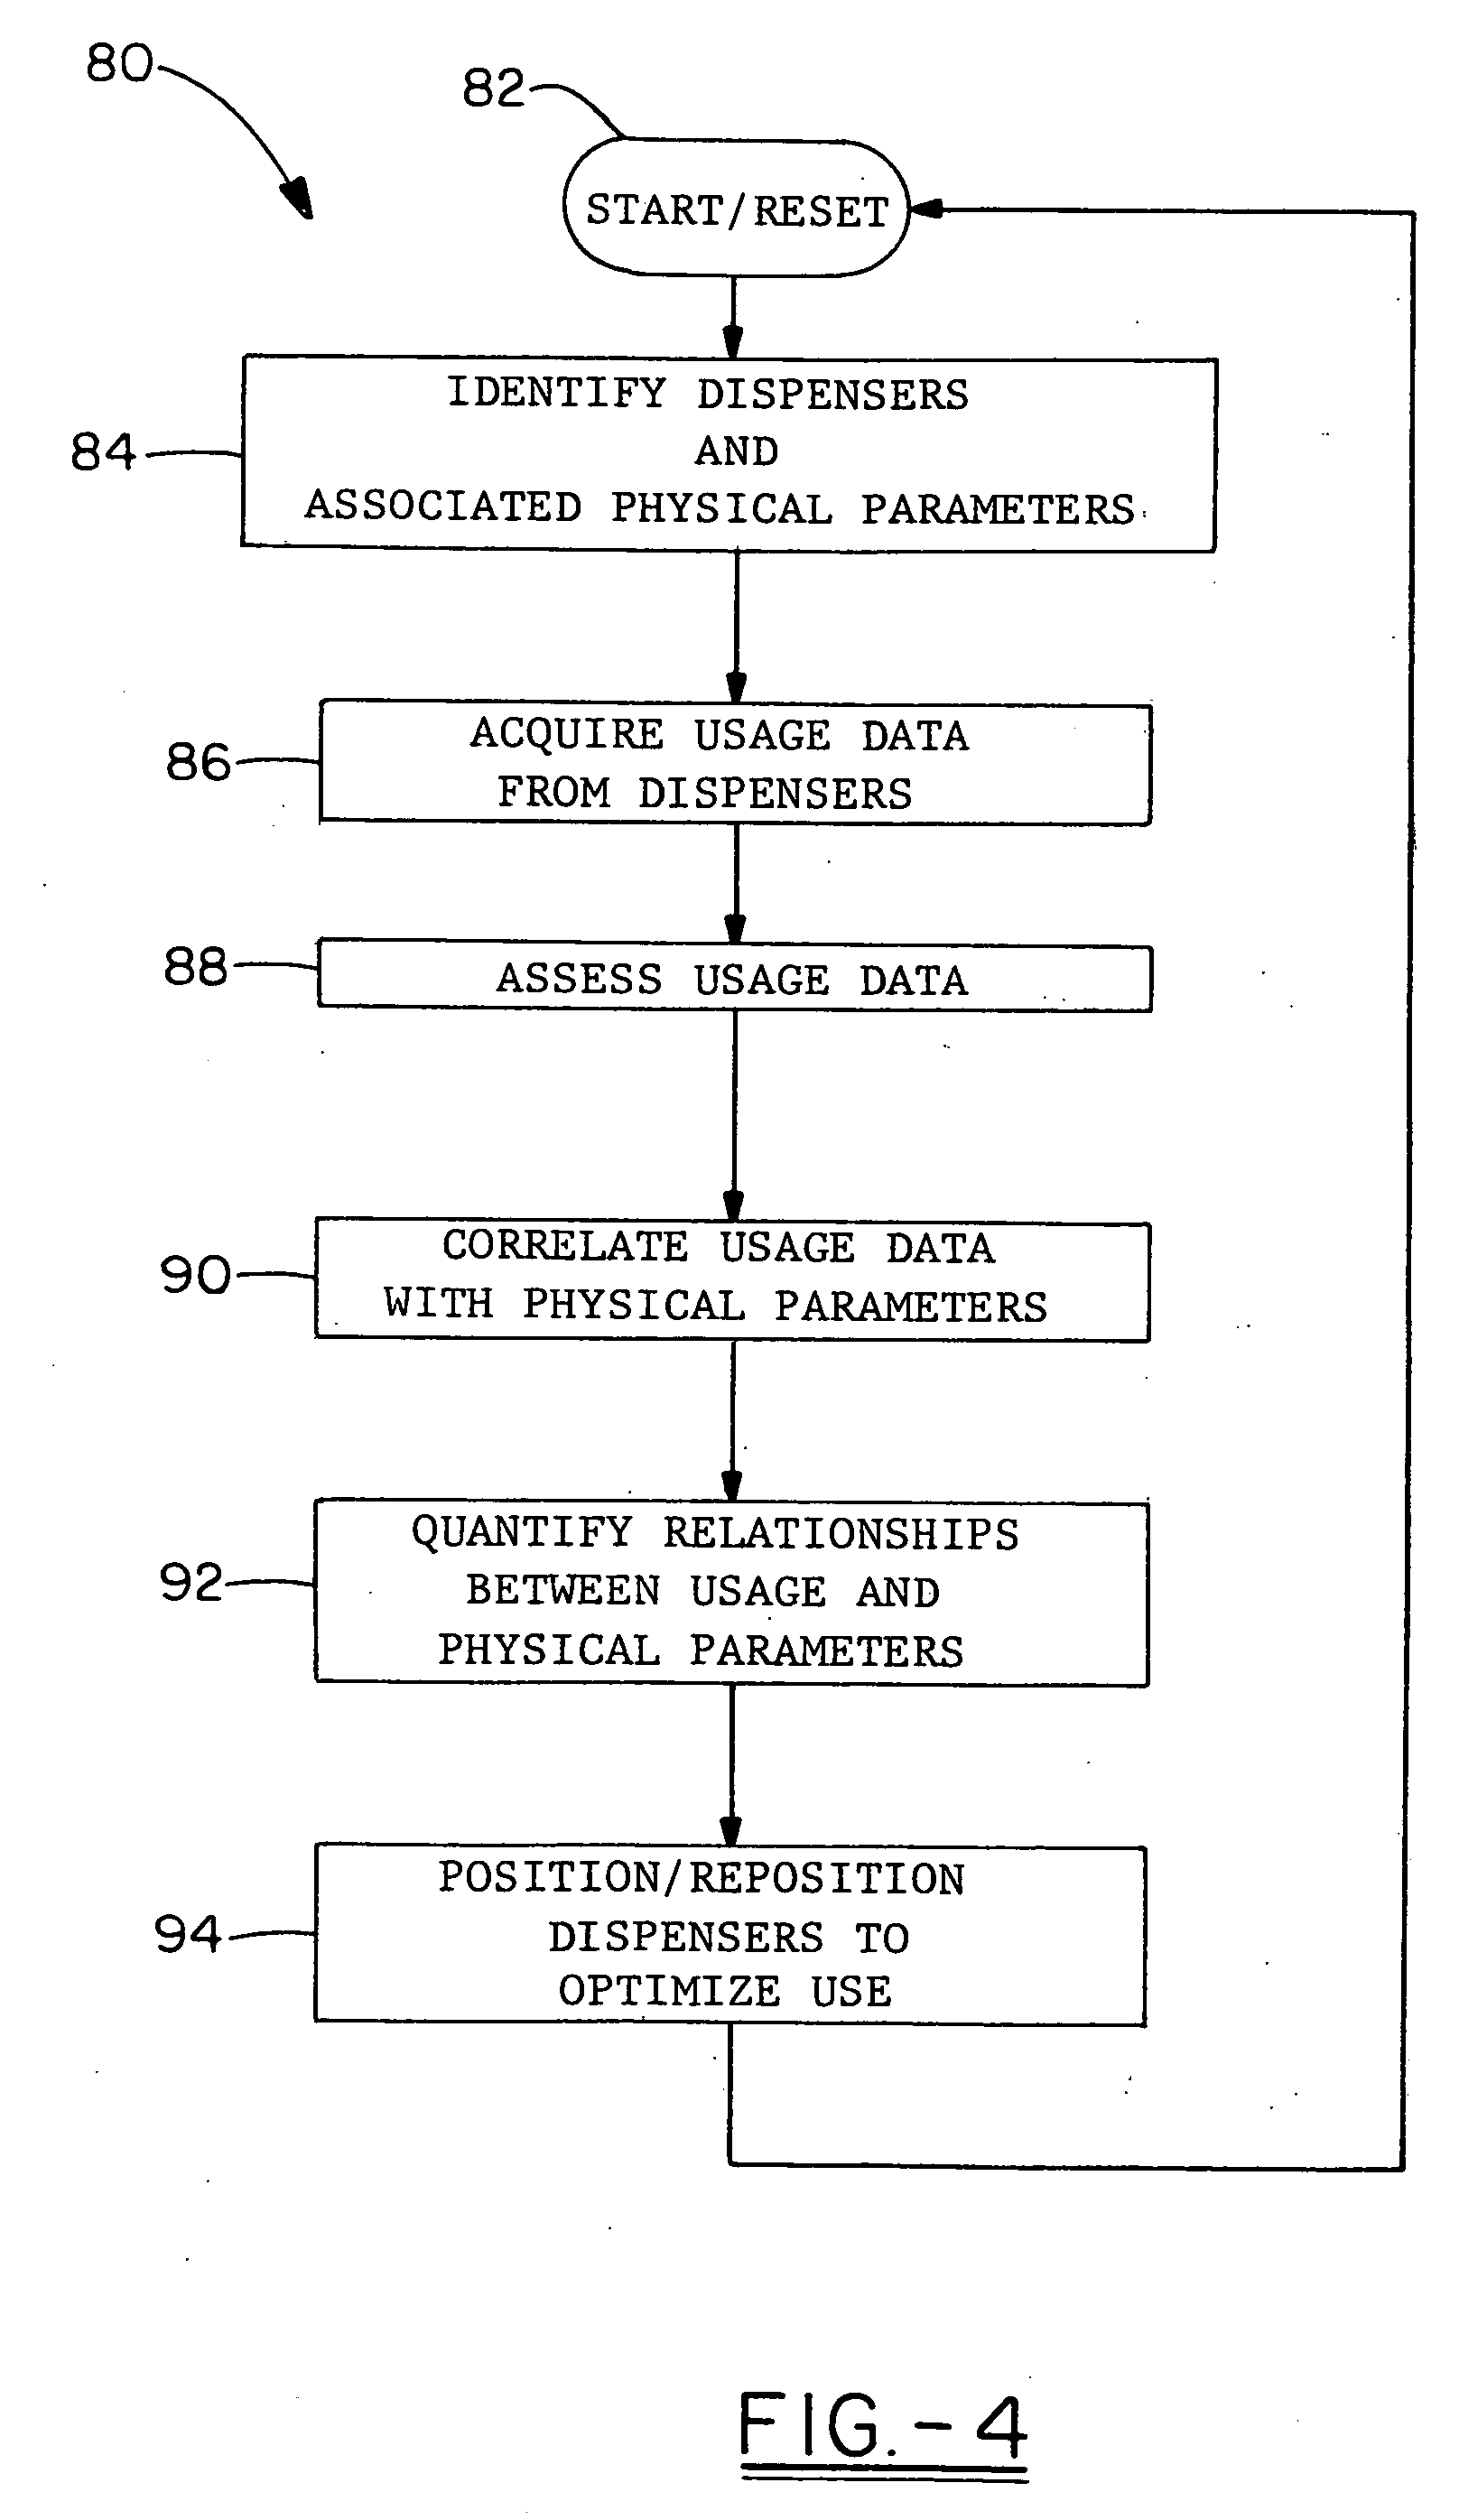 Method and apparatus for analysis and improvement of hand hygiene practices